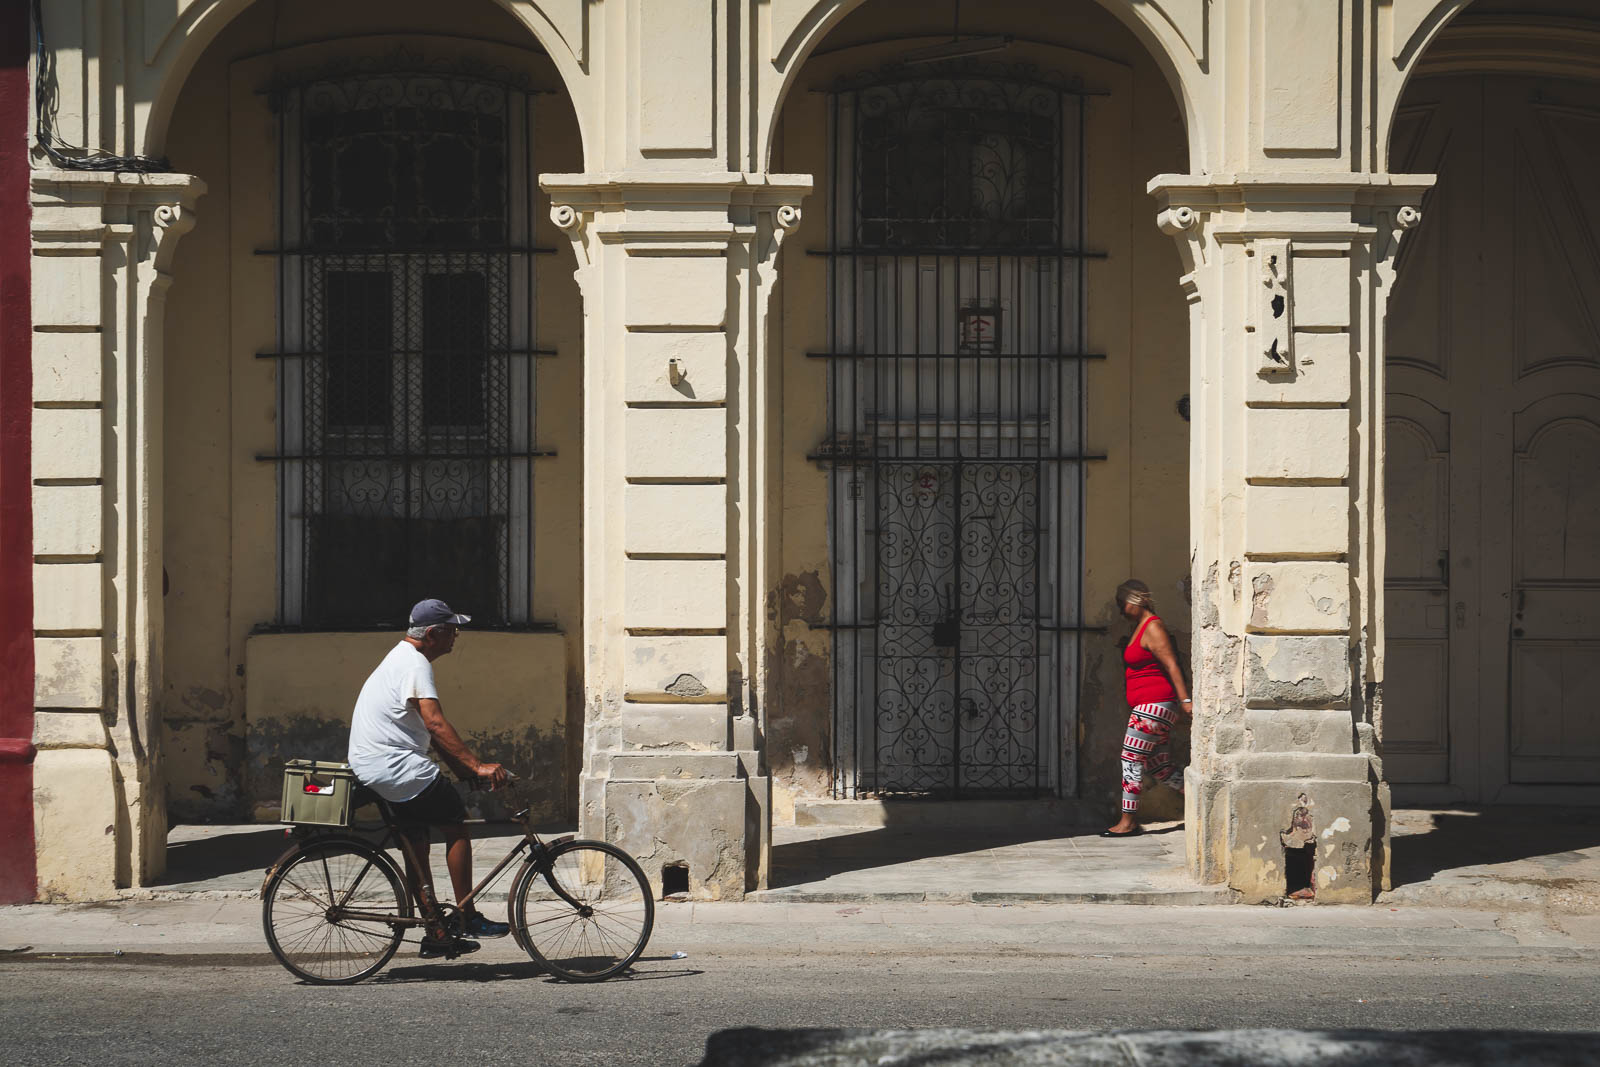 cuba facts - it's divers - a man riding his bicycle